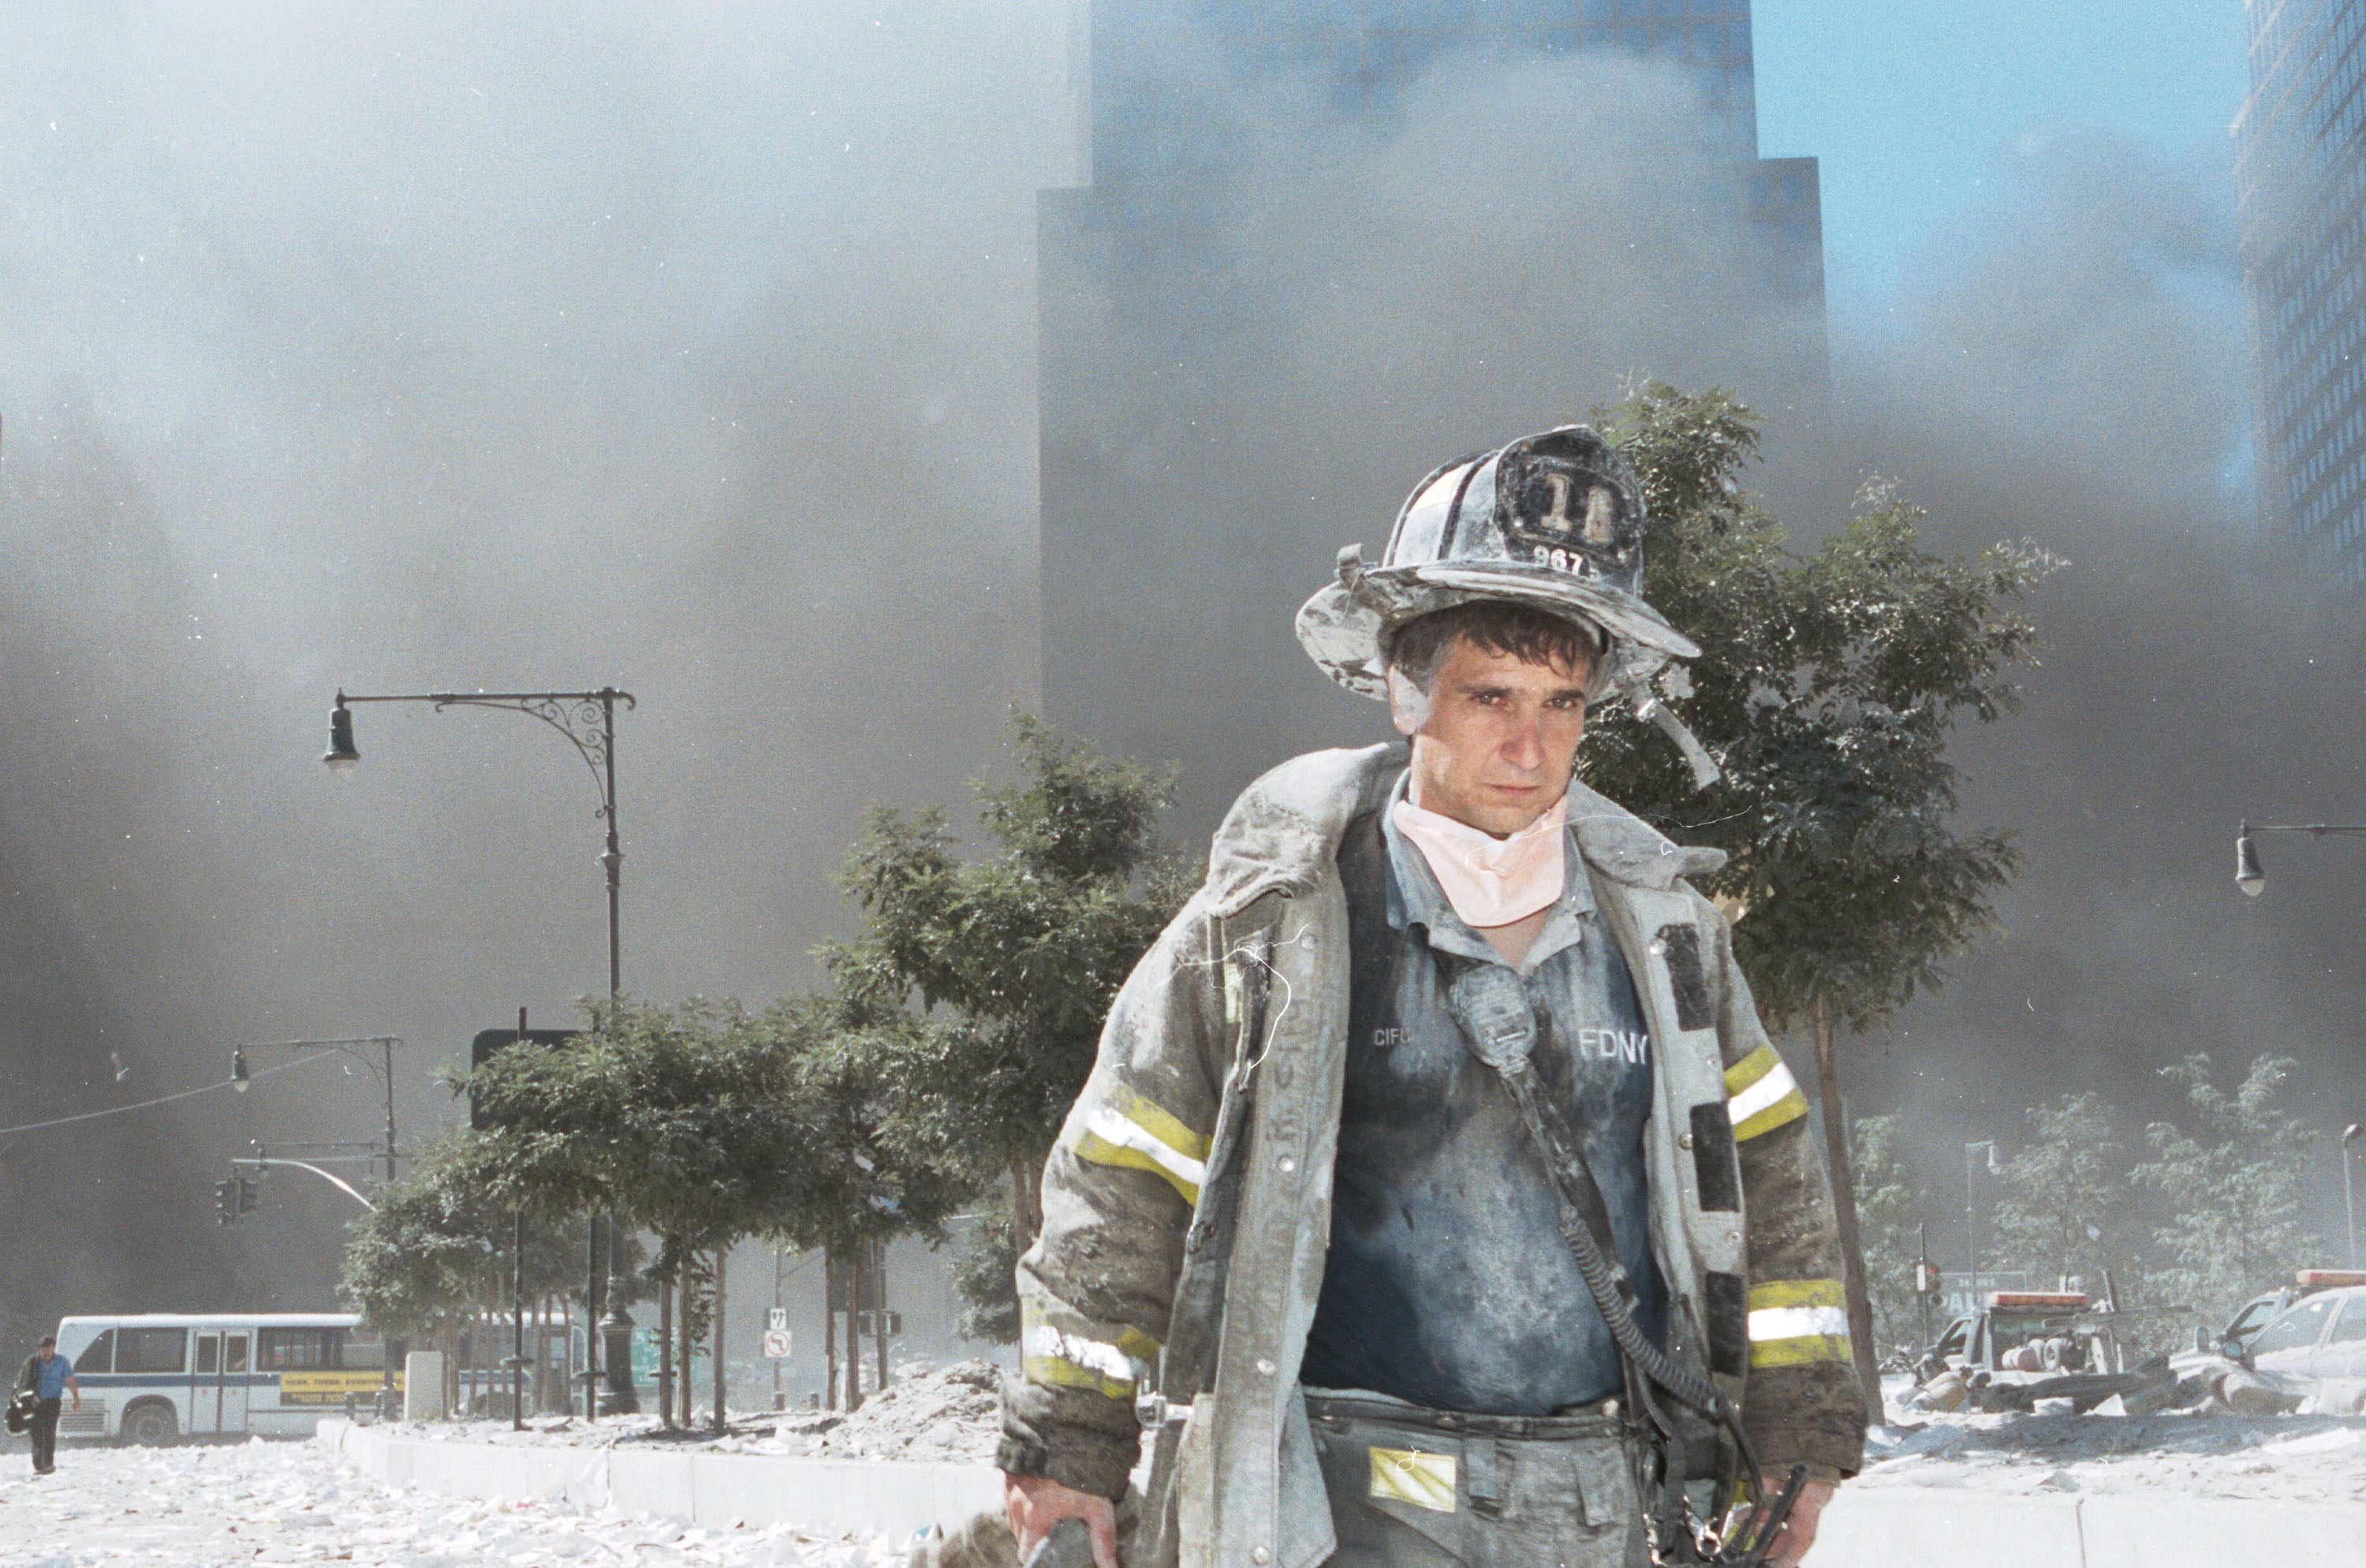 An unidentified firefighter walks away from the rubble on 9/11